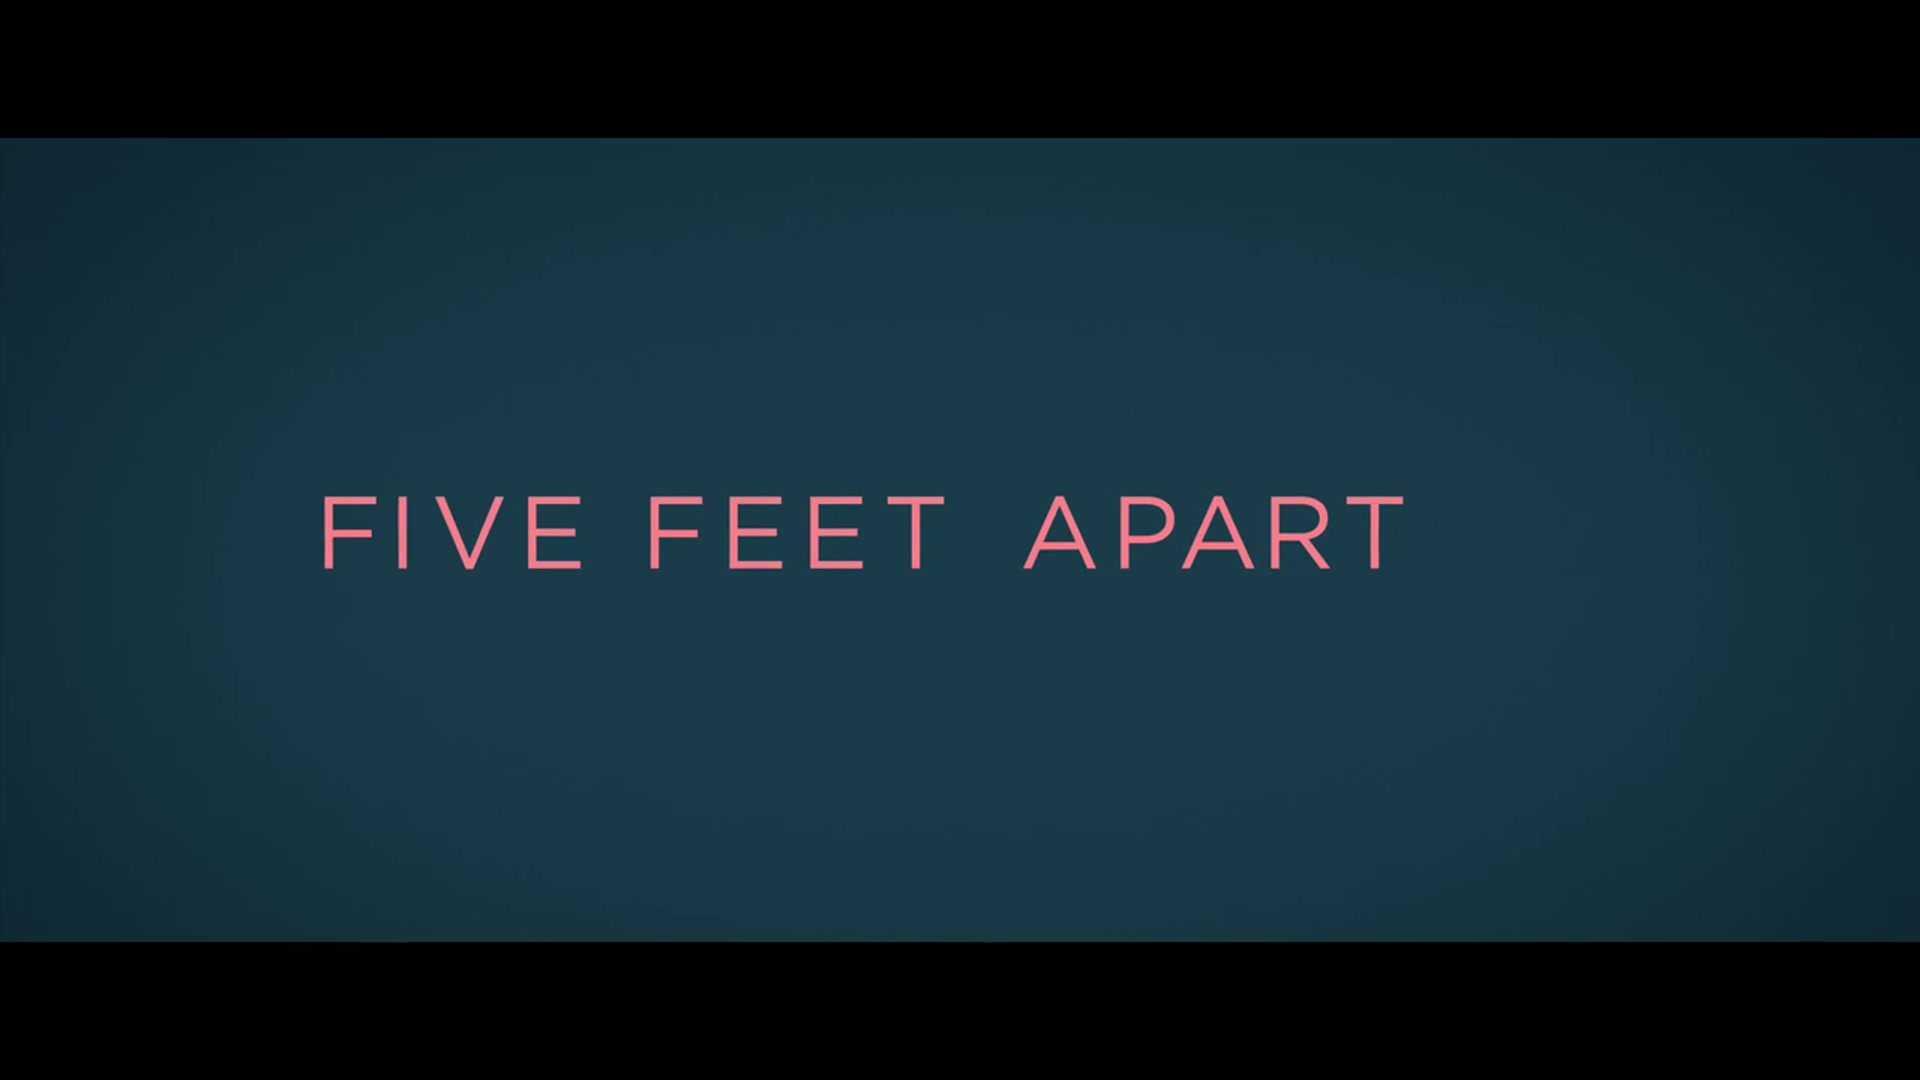 New & Image for “FIVE FEET APART” Coming In March From CBS